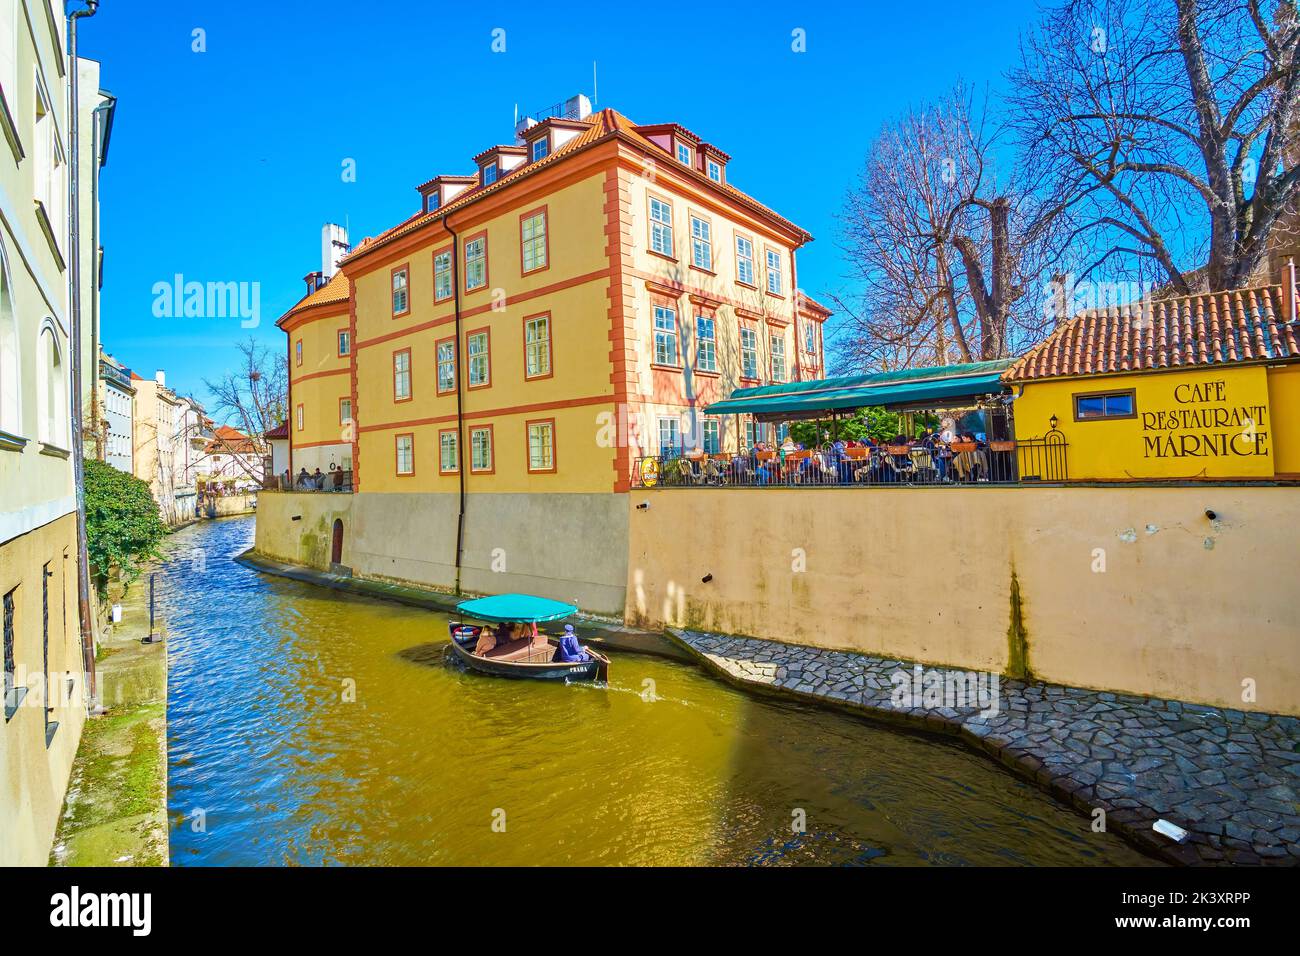 PRAGUE, CZECH REPUBLIC - MARCH 12, 2022: Small boat sails along Certovka Canal among medieval mansions and popular restaurants, on March 12 in Prague, Stock Photo